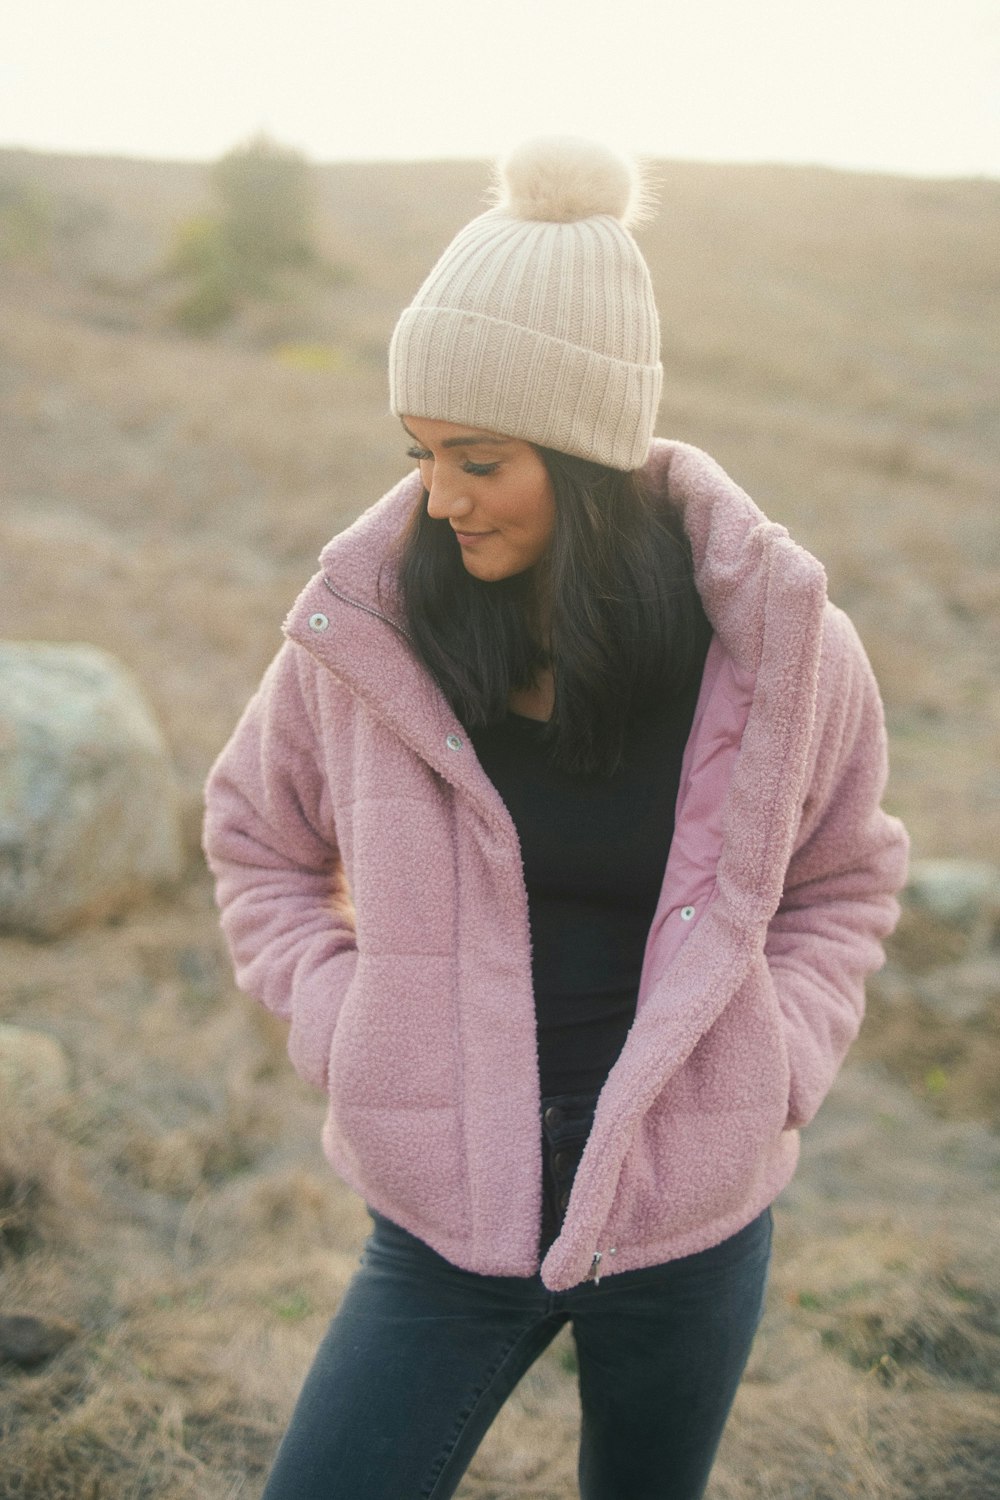 Woman in pink knit cap and pink jacket photo – Free Beanie Image on Unsplash